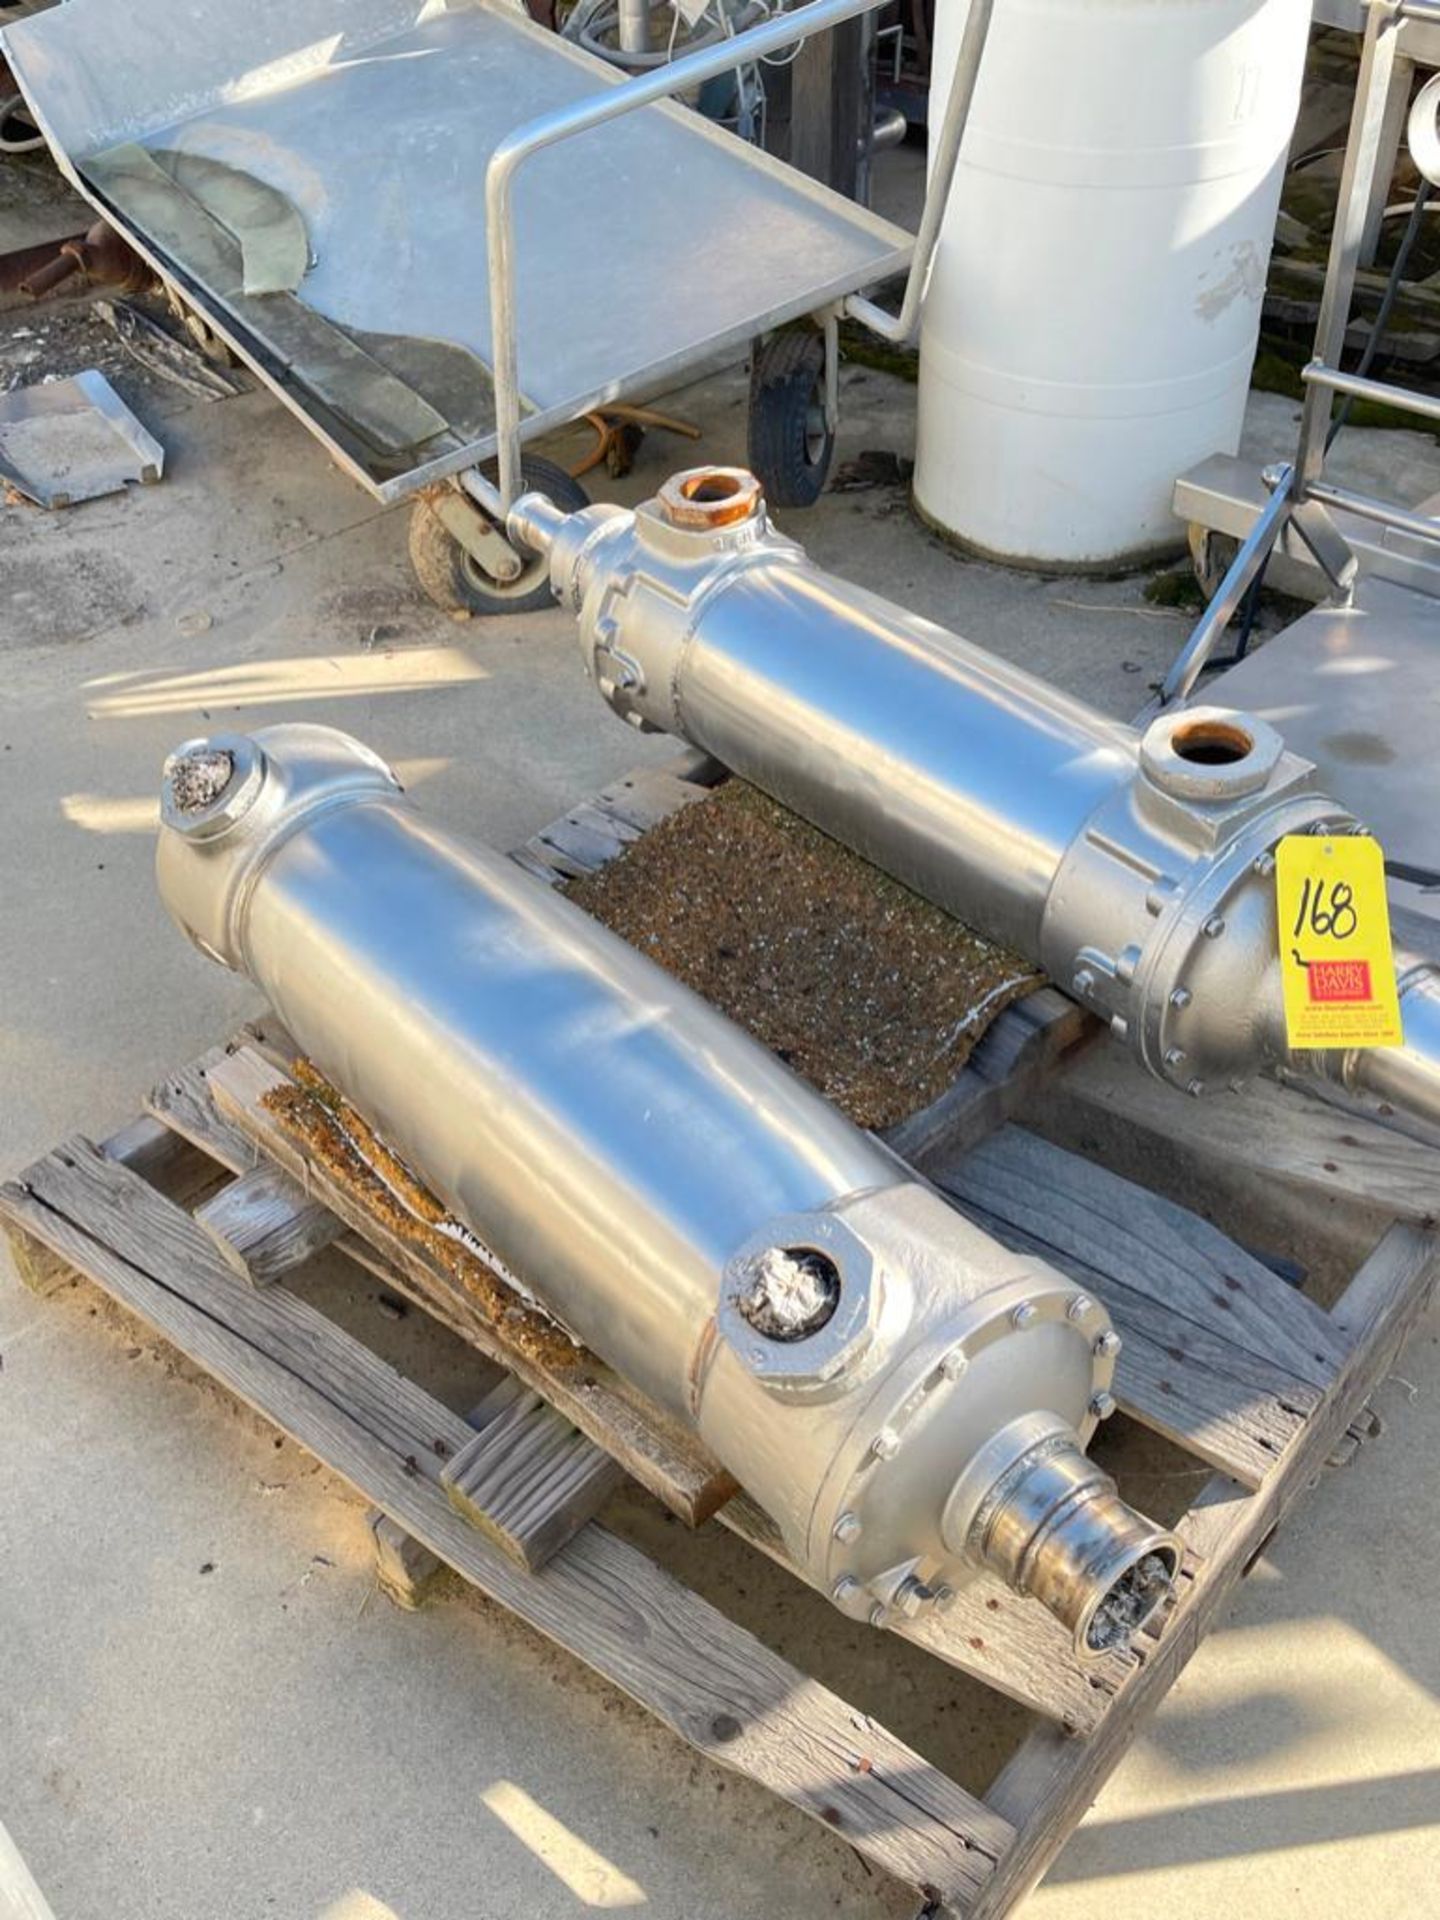 S/S Shell/Tube Heat Exchangers - Rigging Fees: $50